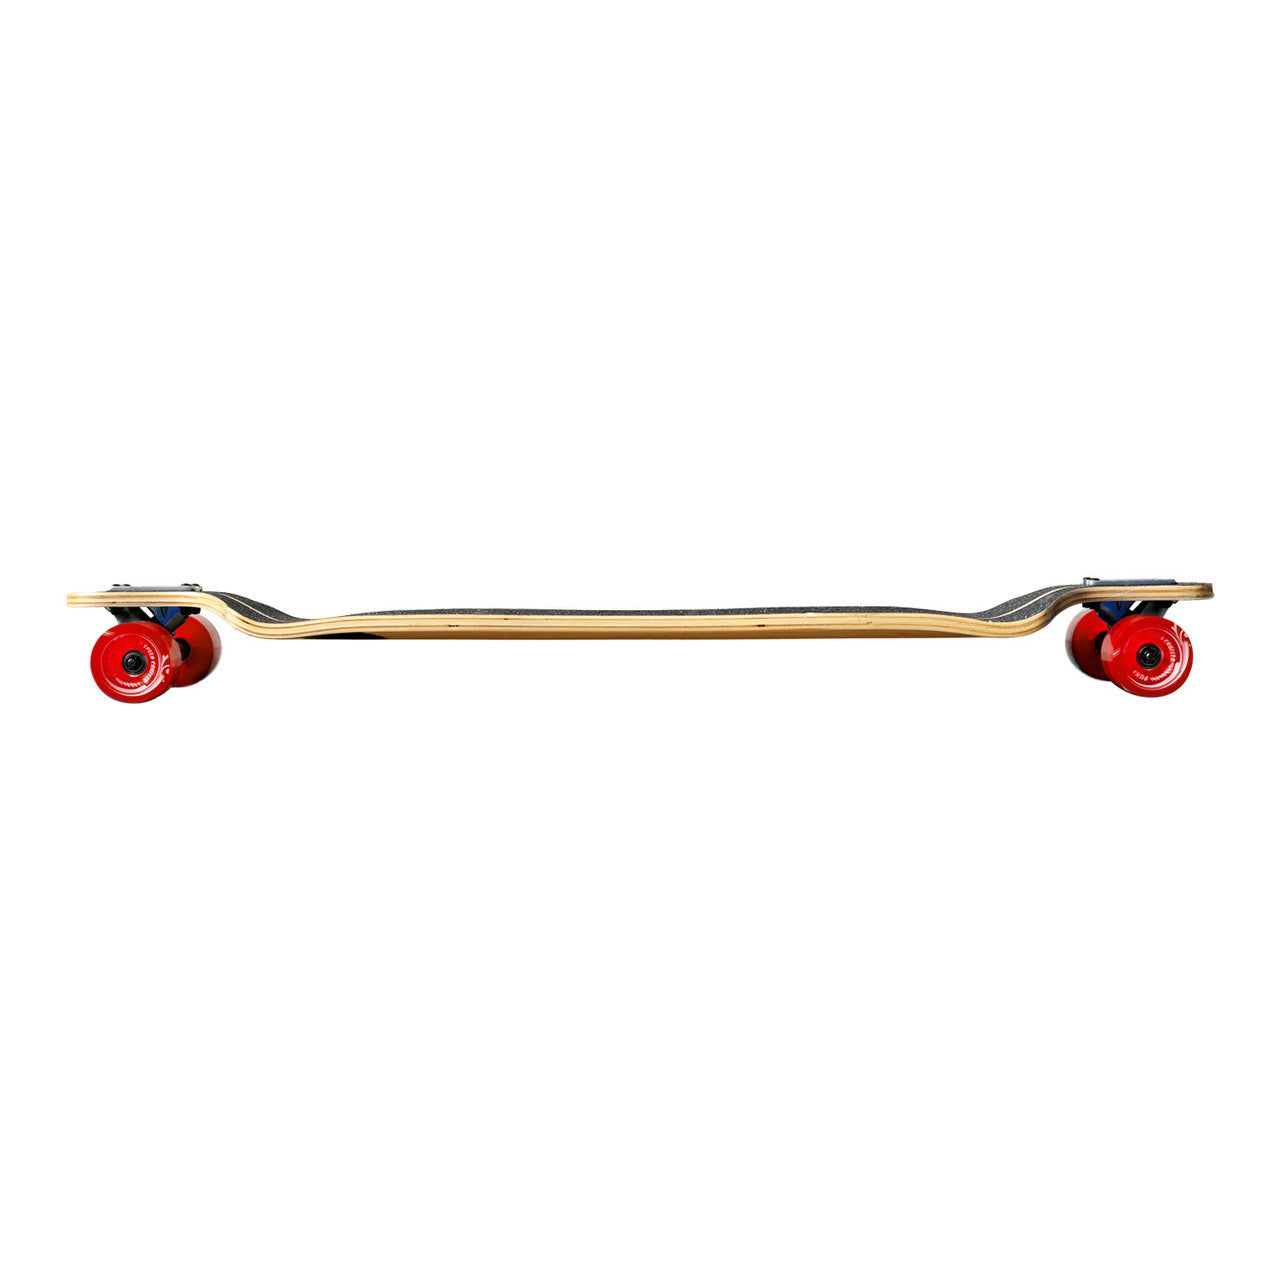 Yocaher Lowrider Longboard Complete - Natural